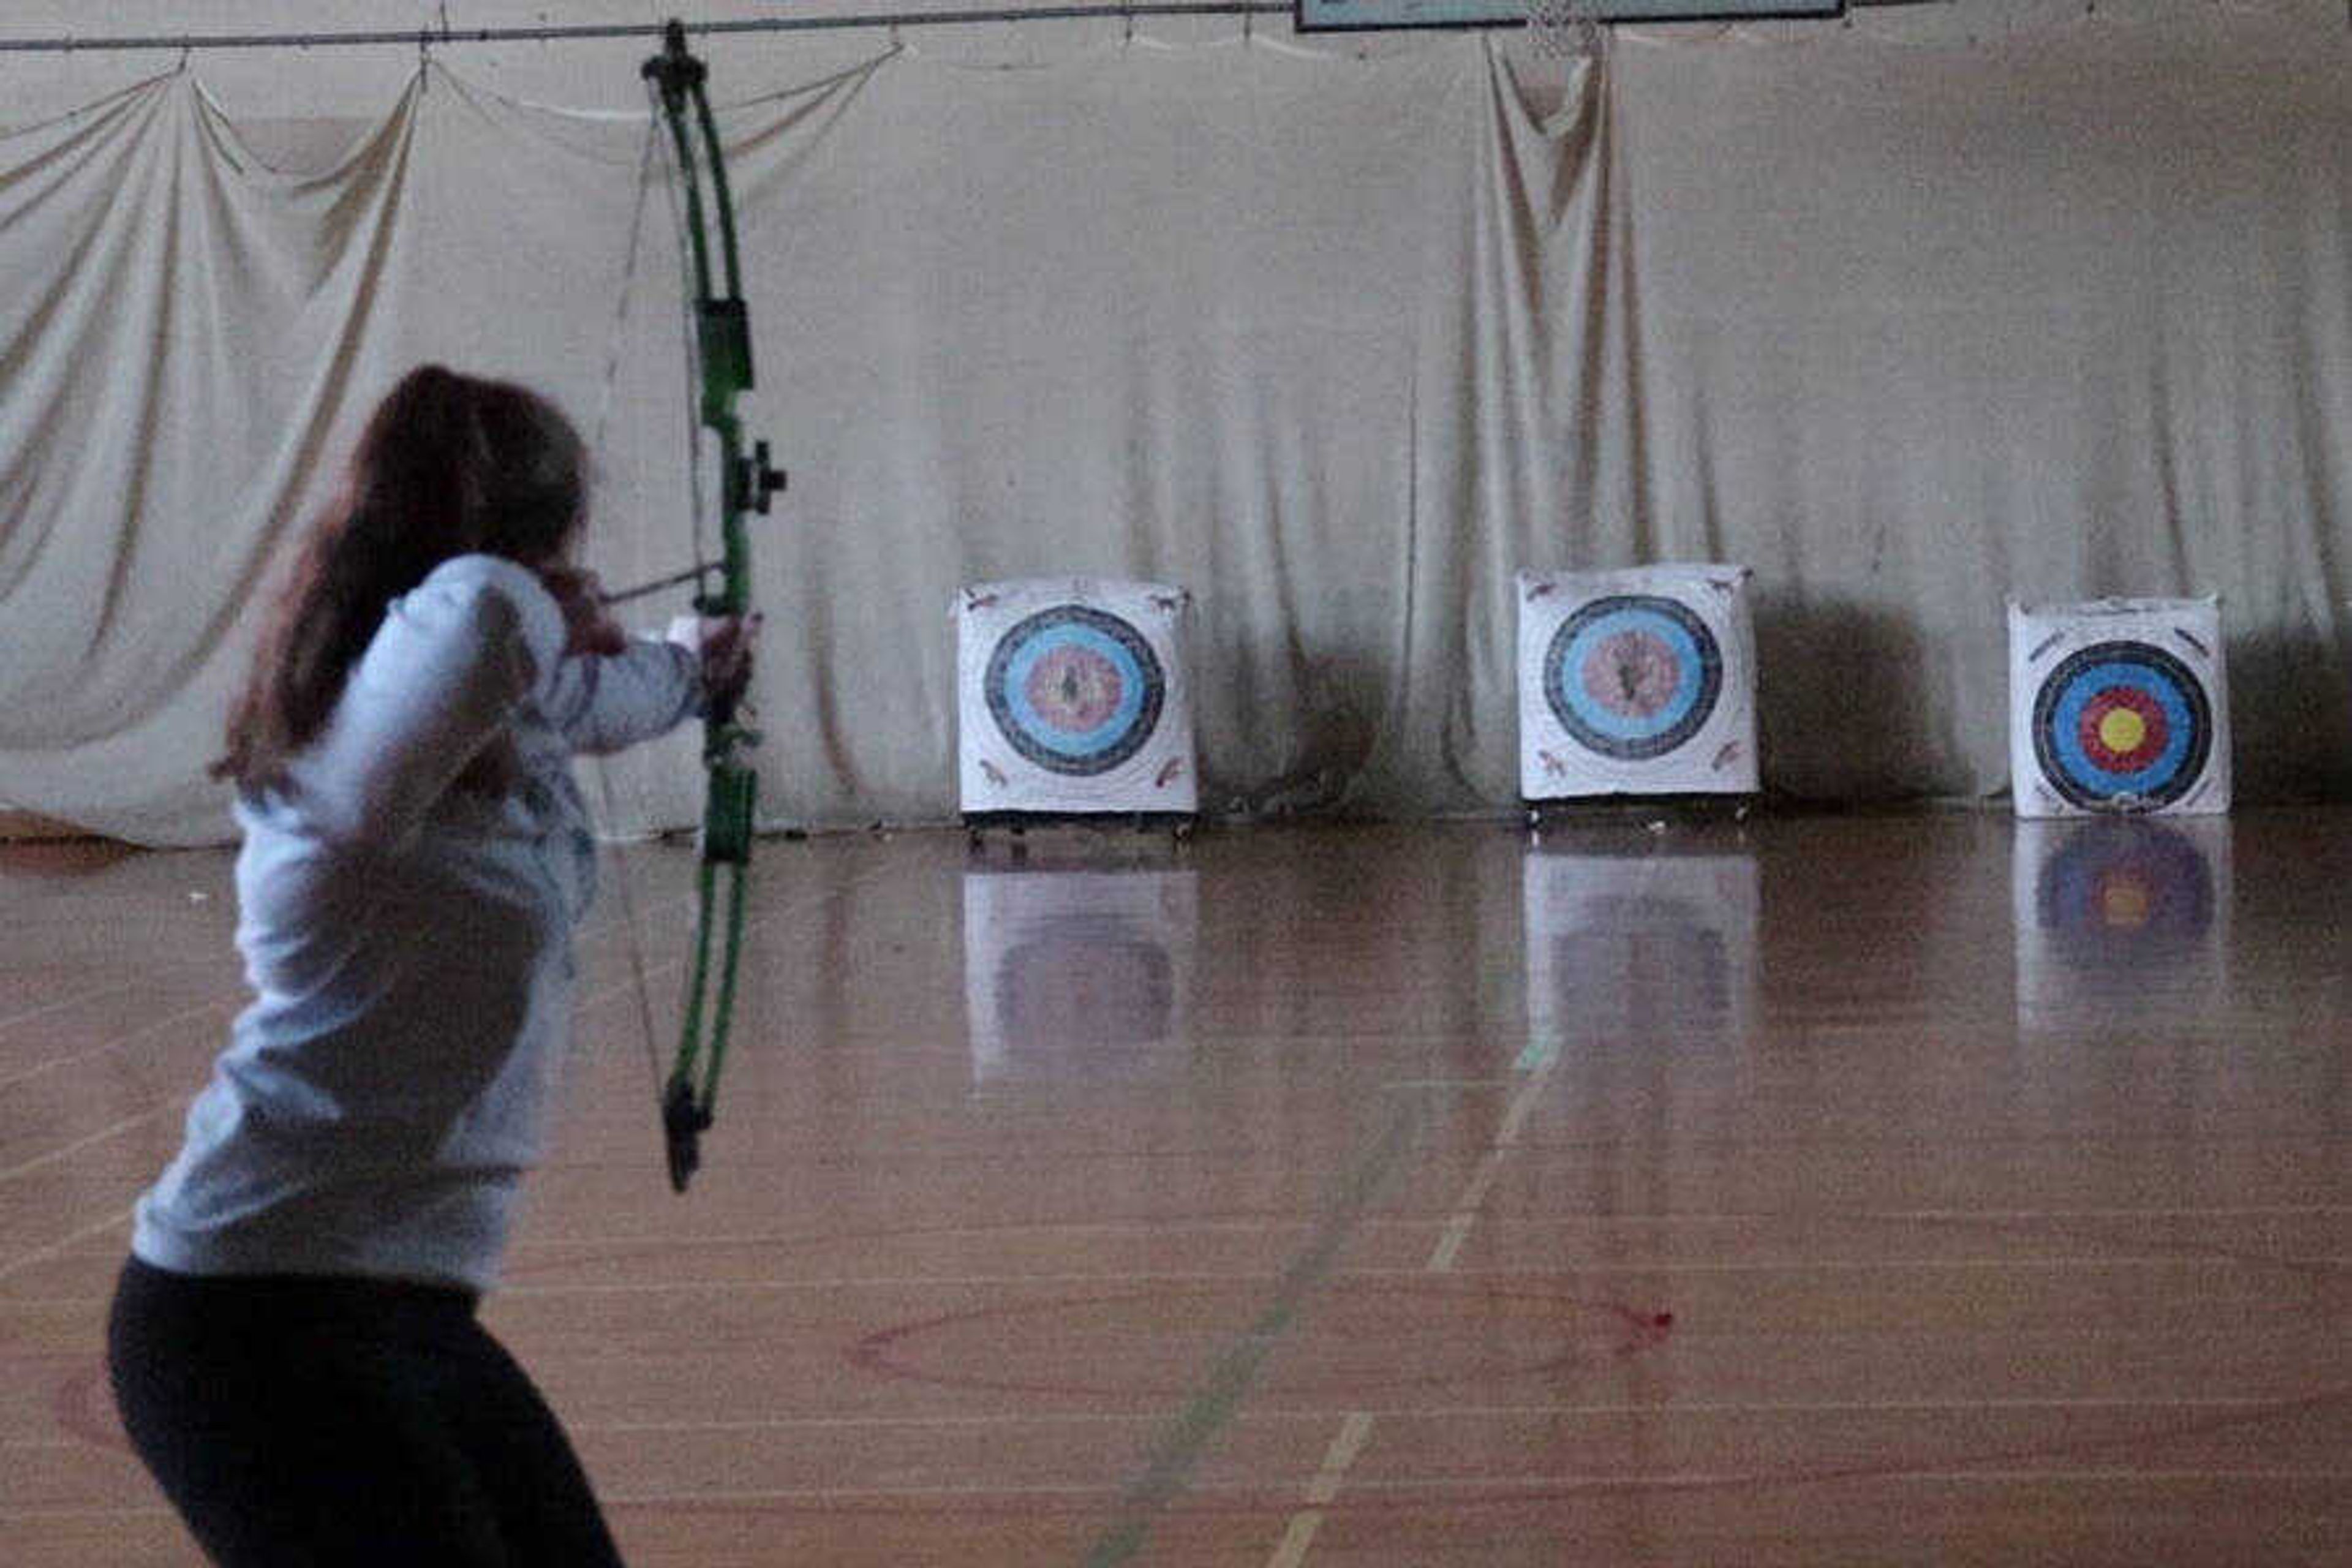 Freshman Emma Lacey practicing her technique with the Archery Club for her first time at SEMO. The club has been inactive for two semesters due to COVID-19.